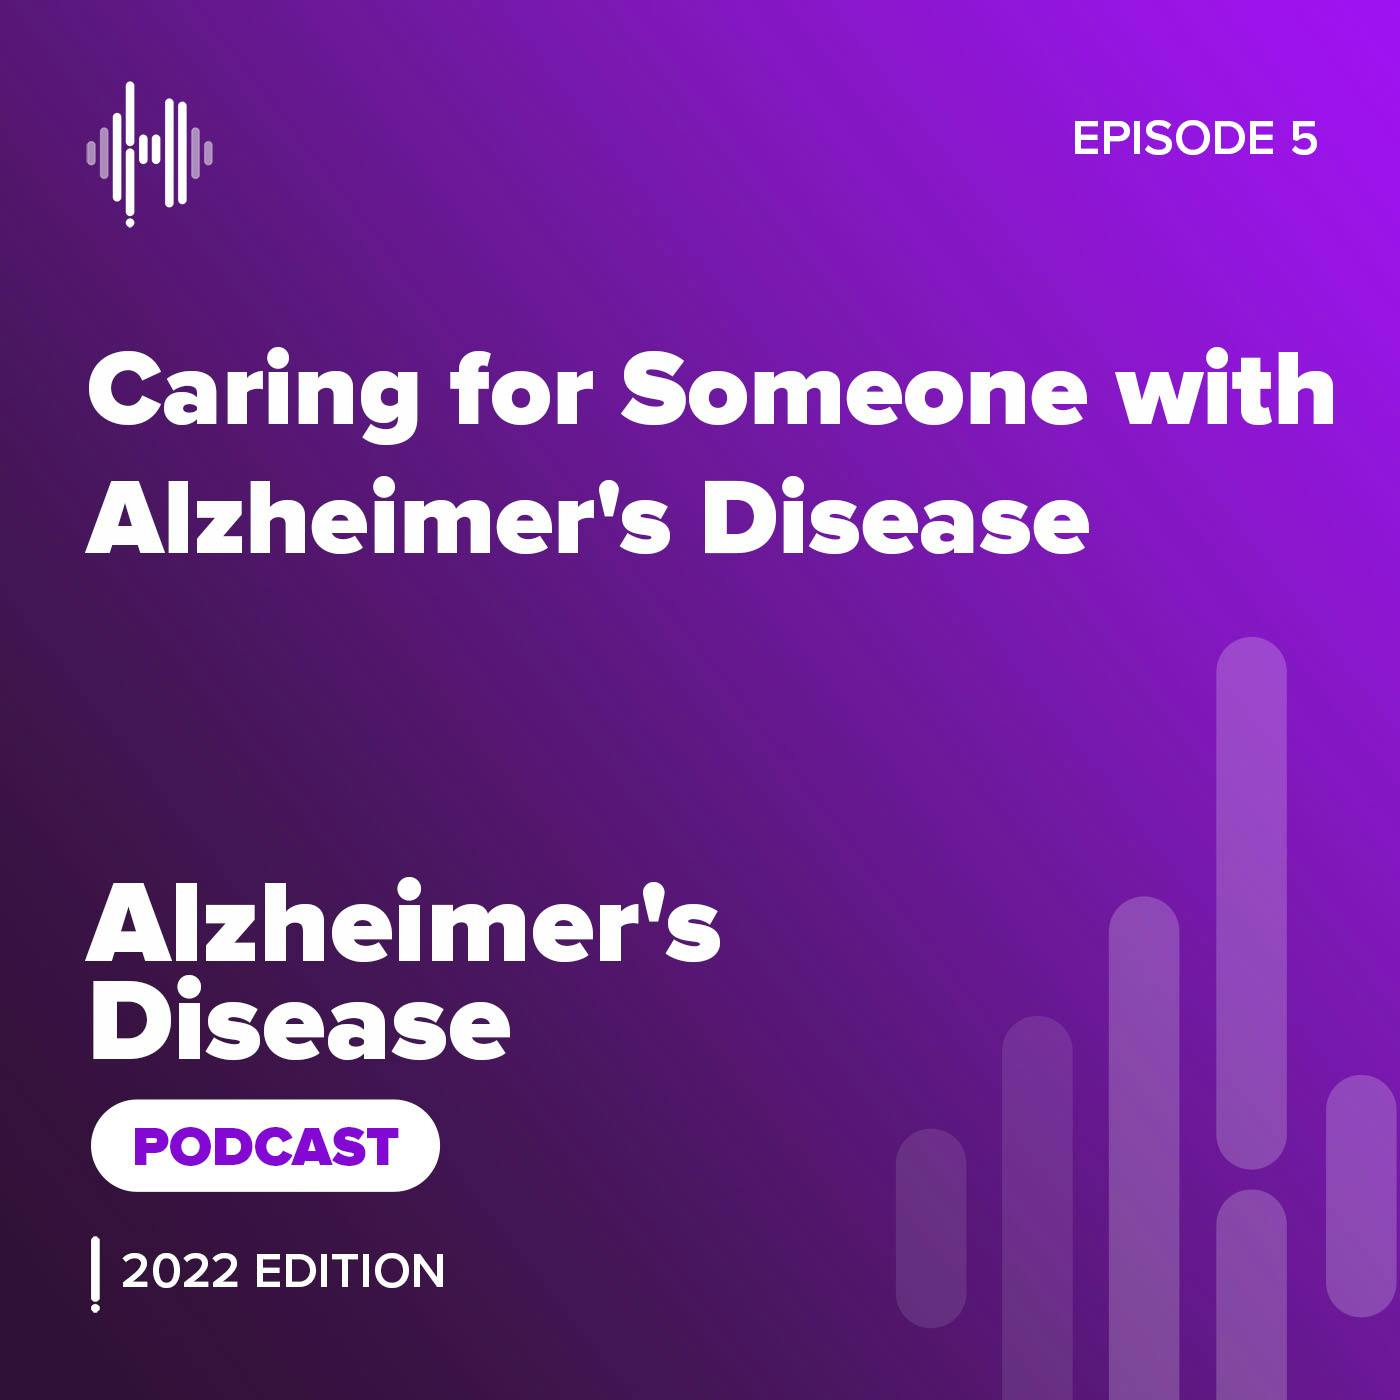 Ep 5: Caring for Someone with Alzheimer's Disease